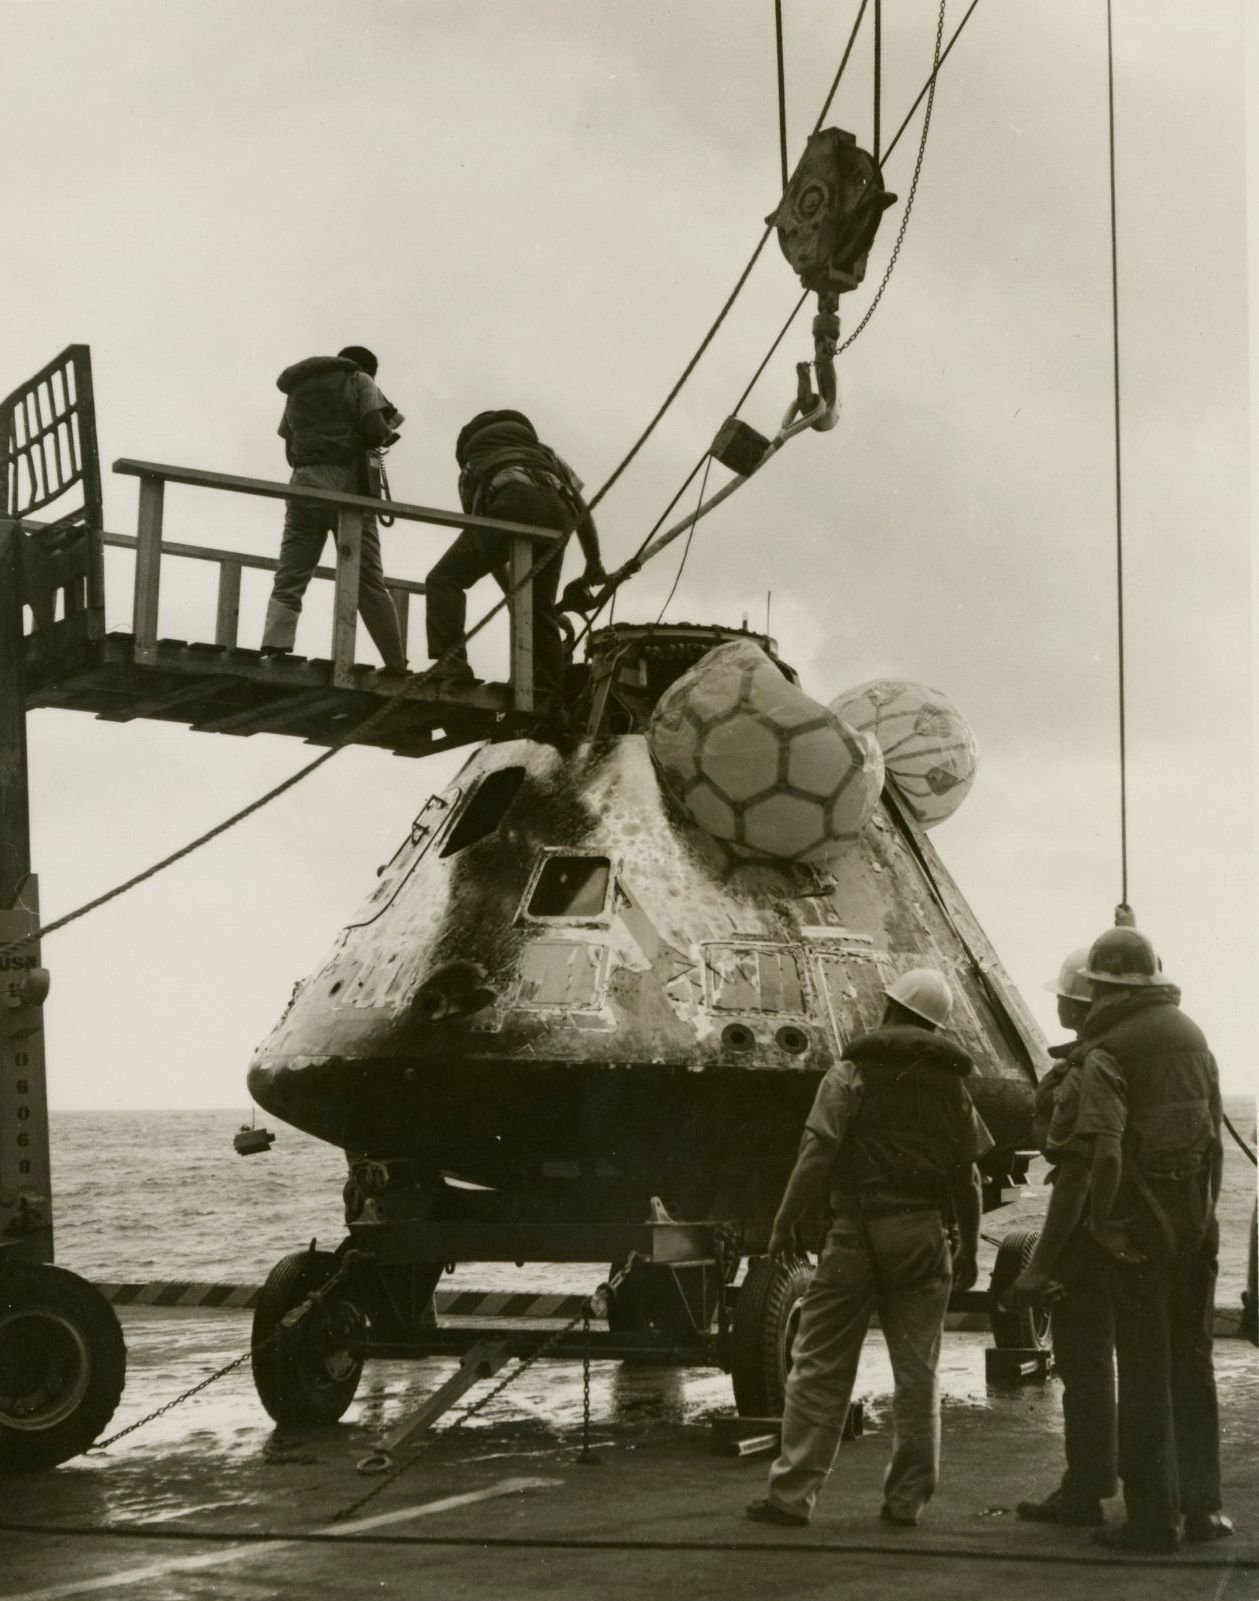 Primary Image of The Apollo 8 Capsule is Brought Aboard